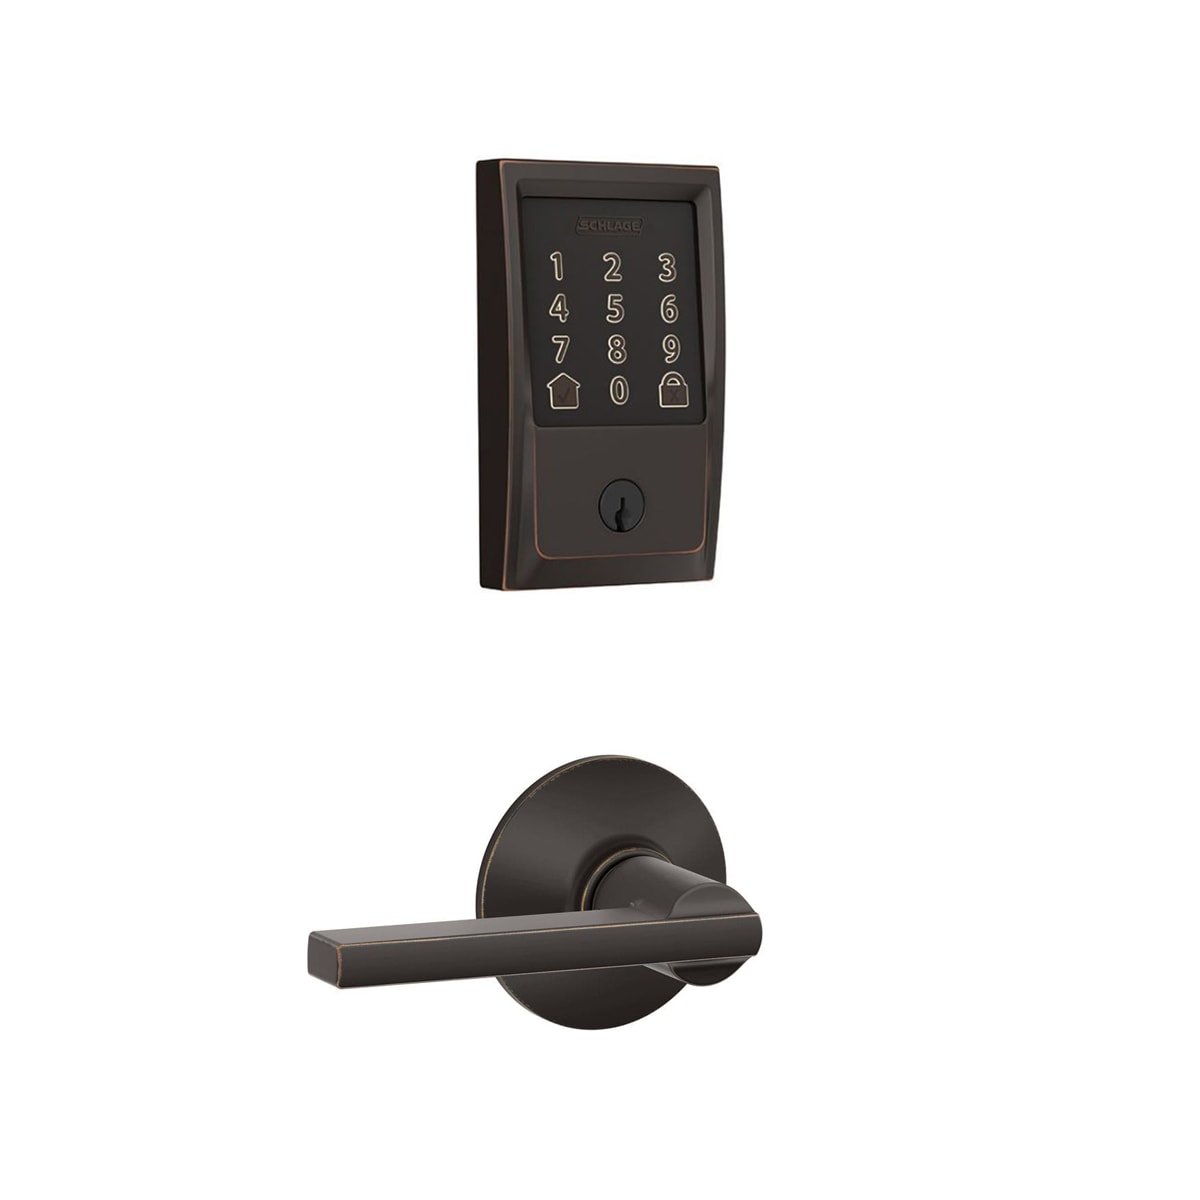 Satin Chrome Electronic Keyless Entry Deadbolt Keypad with Plymouth Trim  Rated AAA